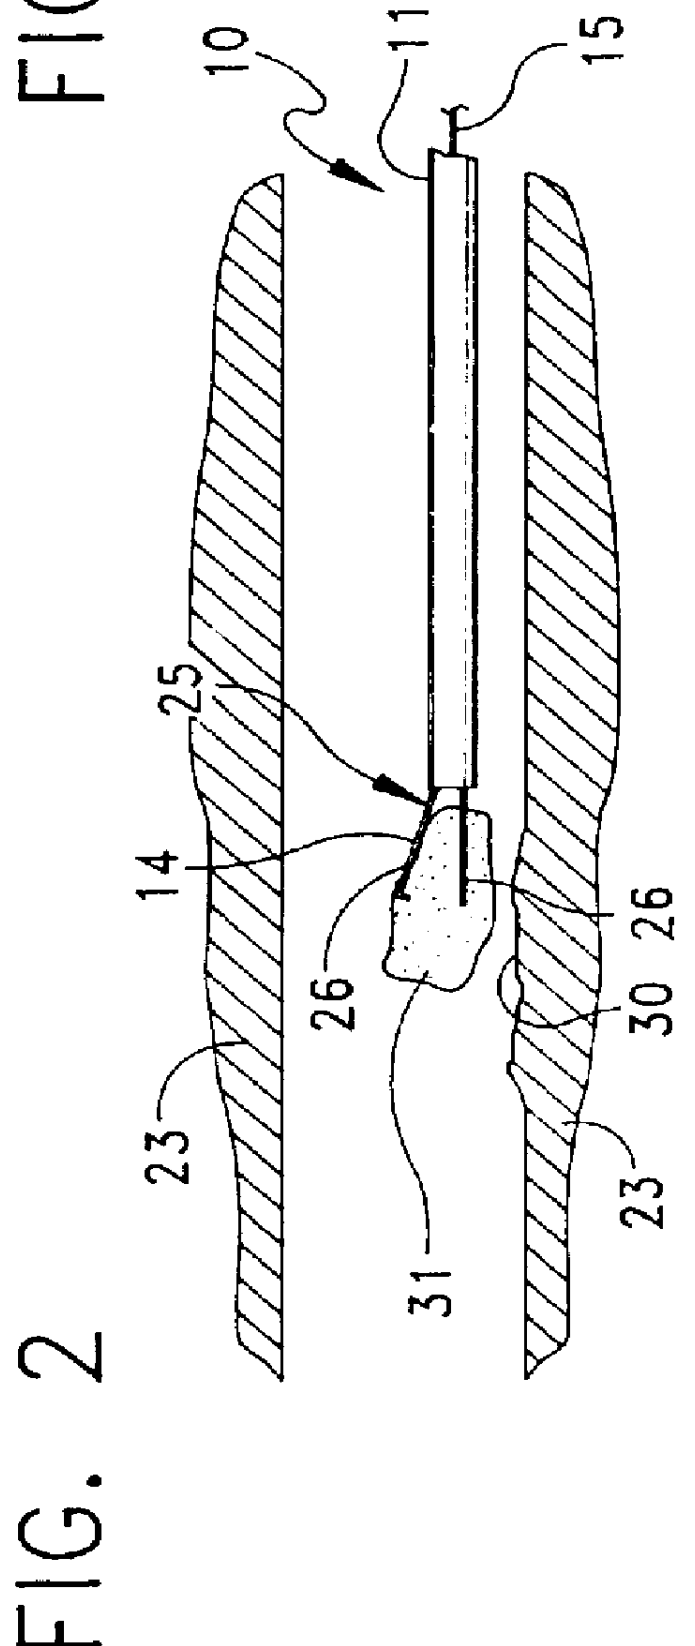 Method and apparatus for severing and capturing polyps